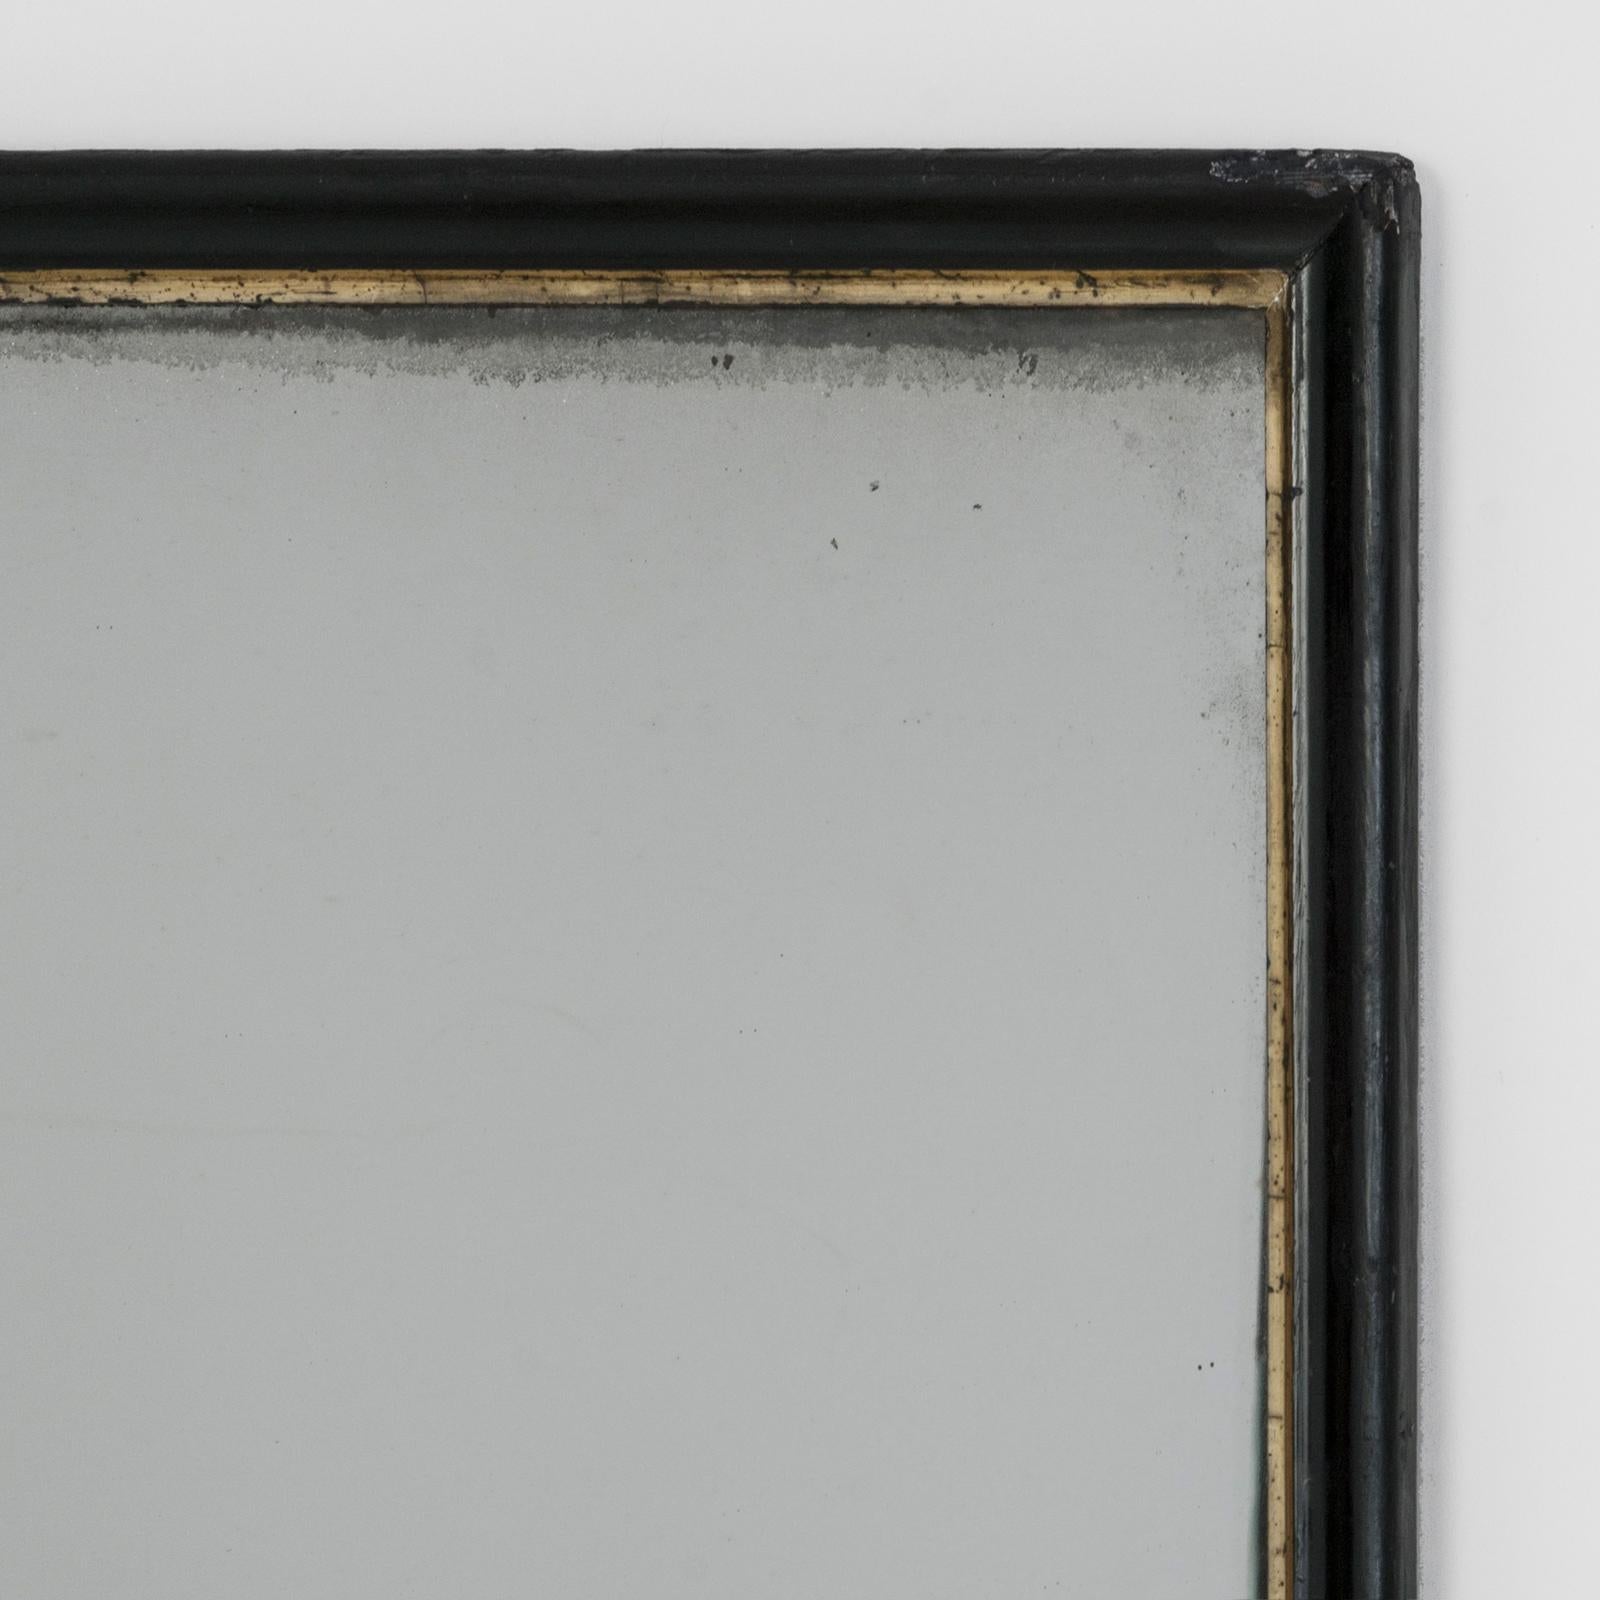 Introducing a majestic French Rectangular Mirror, styled in the Napoleon III fashion, dating back to around 1880-1890. Its frame elegantly combines shades of black and gold with subtlety and grace.

Discovering an antique Napoleon III mirror of this